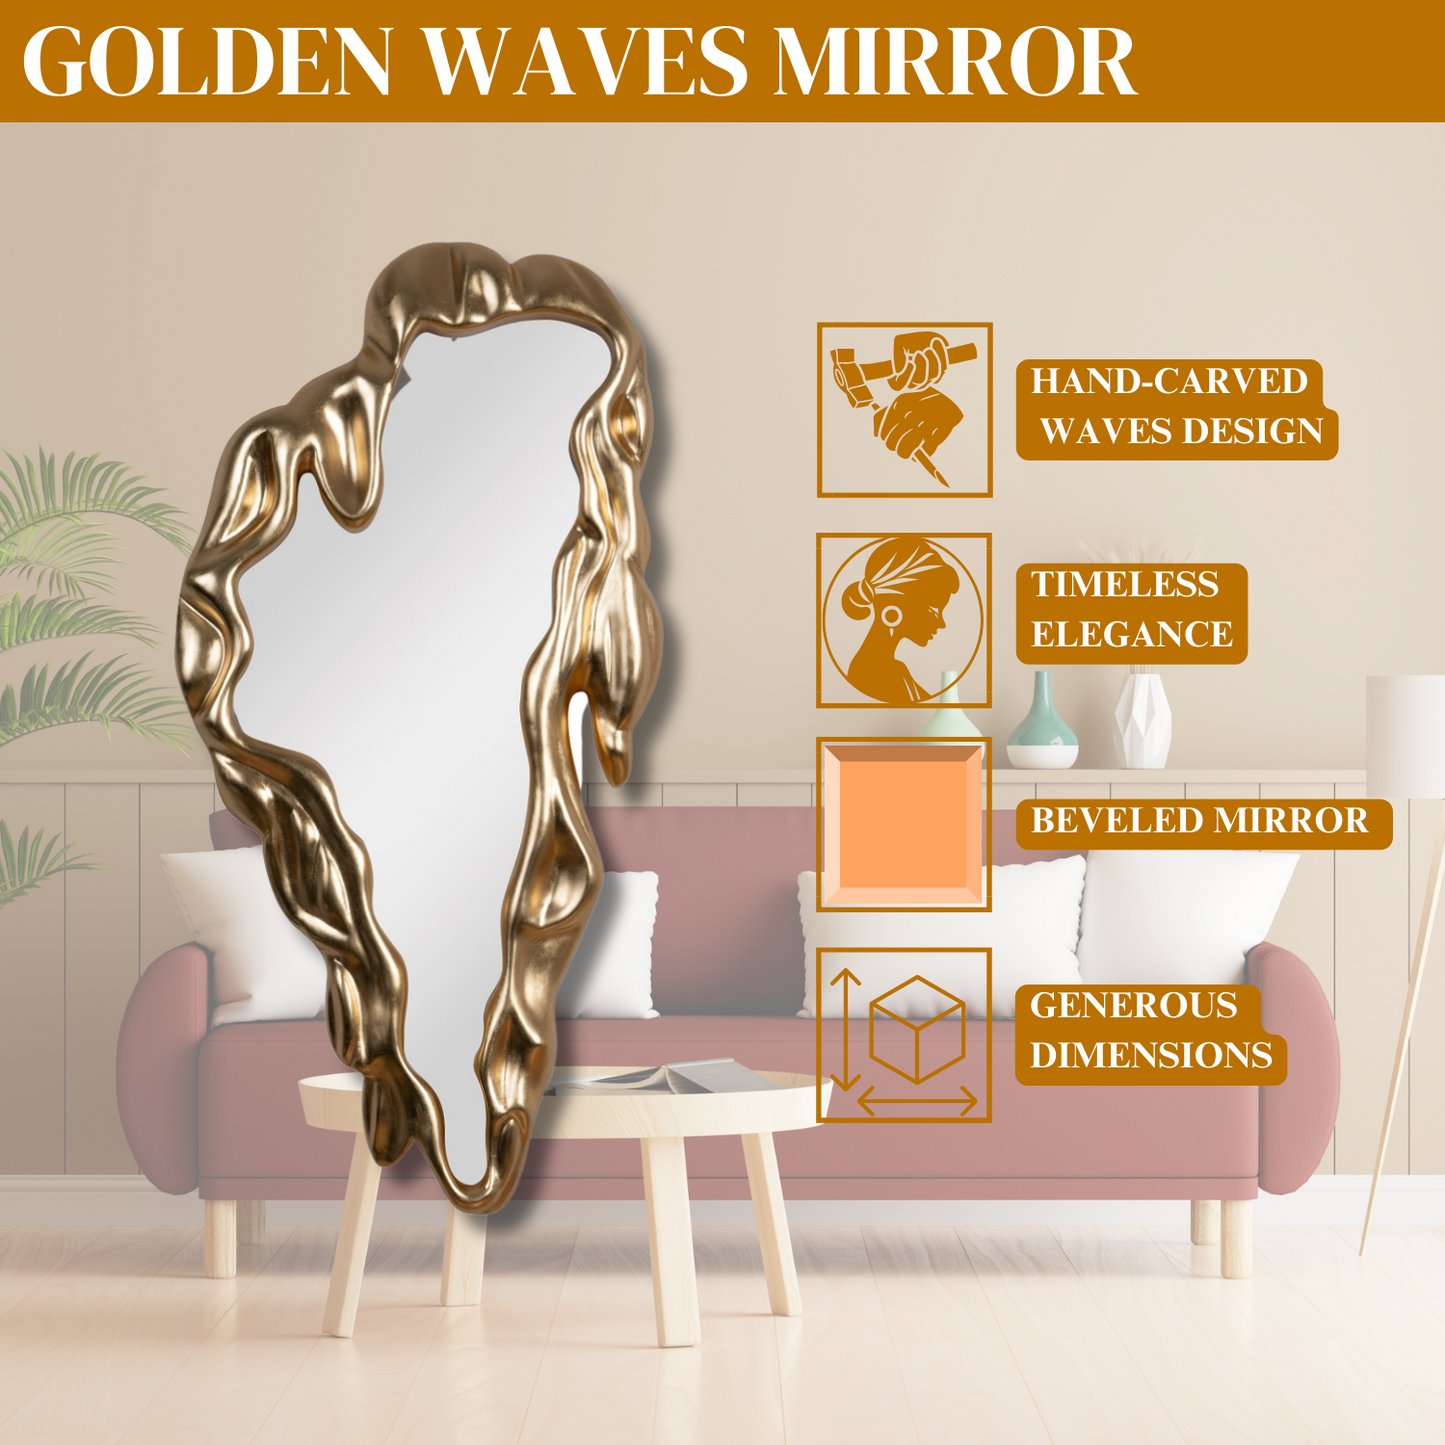 Golden Waves Reflection - Modern Wall Mirror with Elegant Wave Design for Contemporary Home Decor